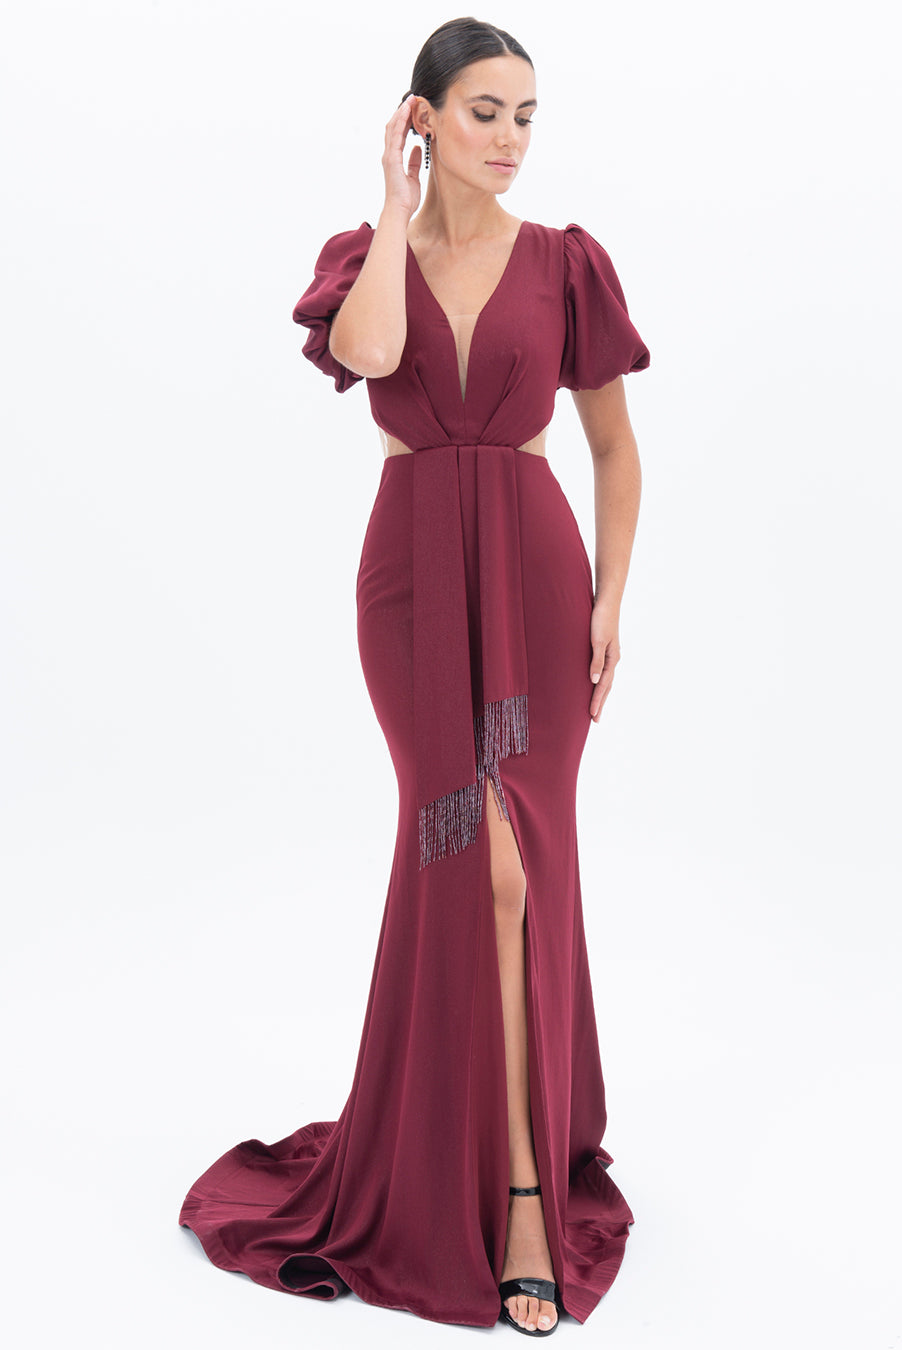 Mary - Mystic Evenings | Evening and Prom Dresses